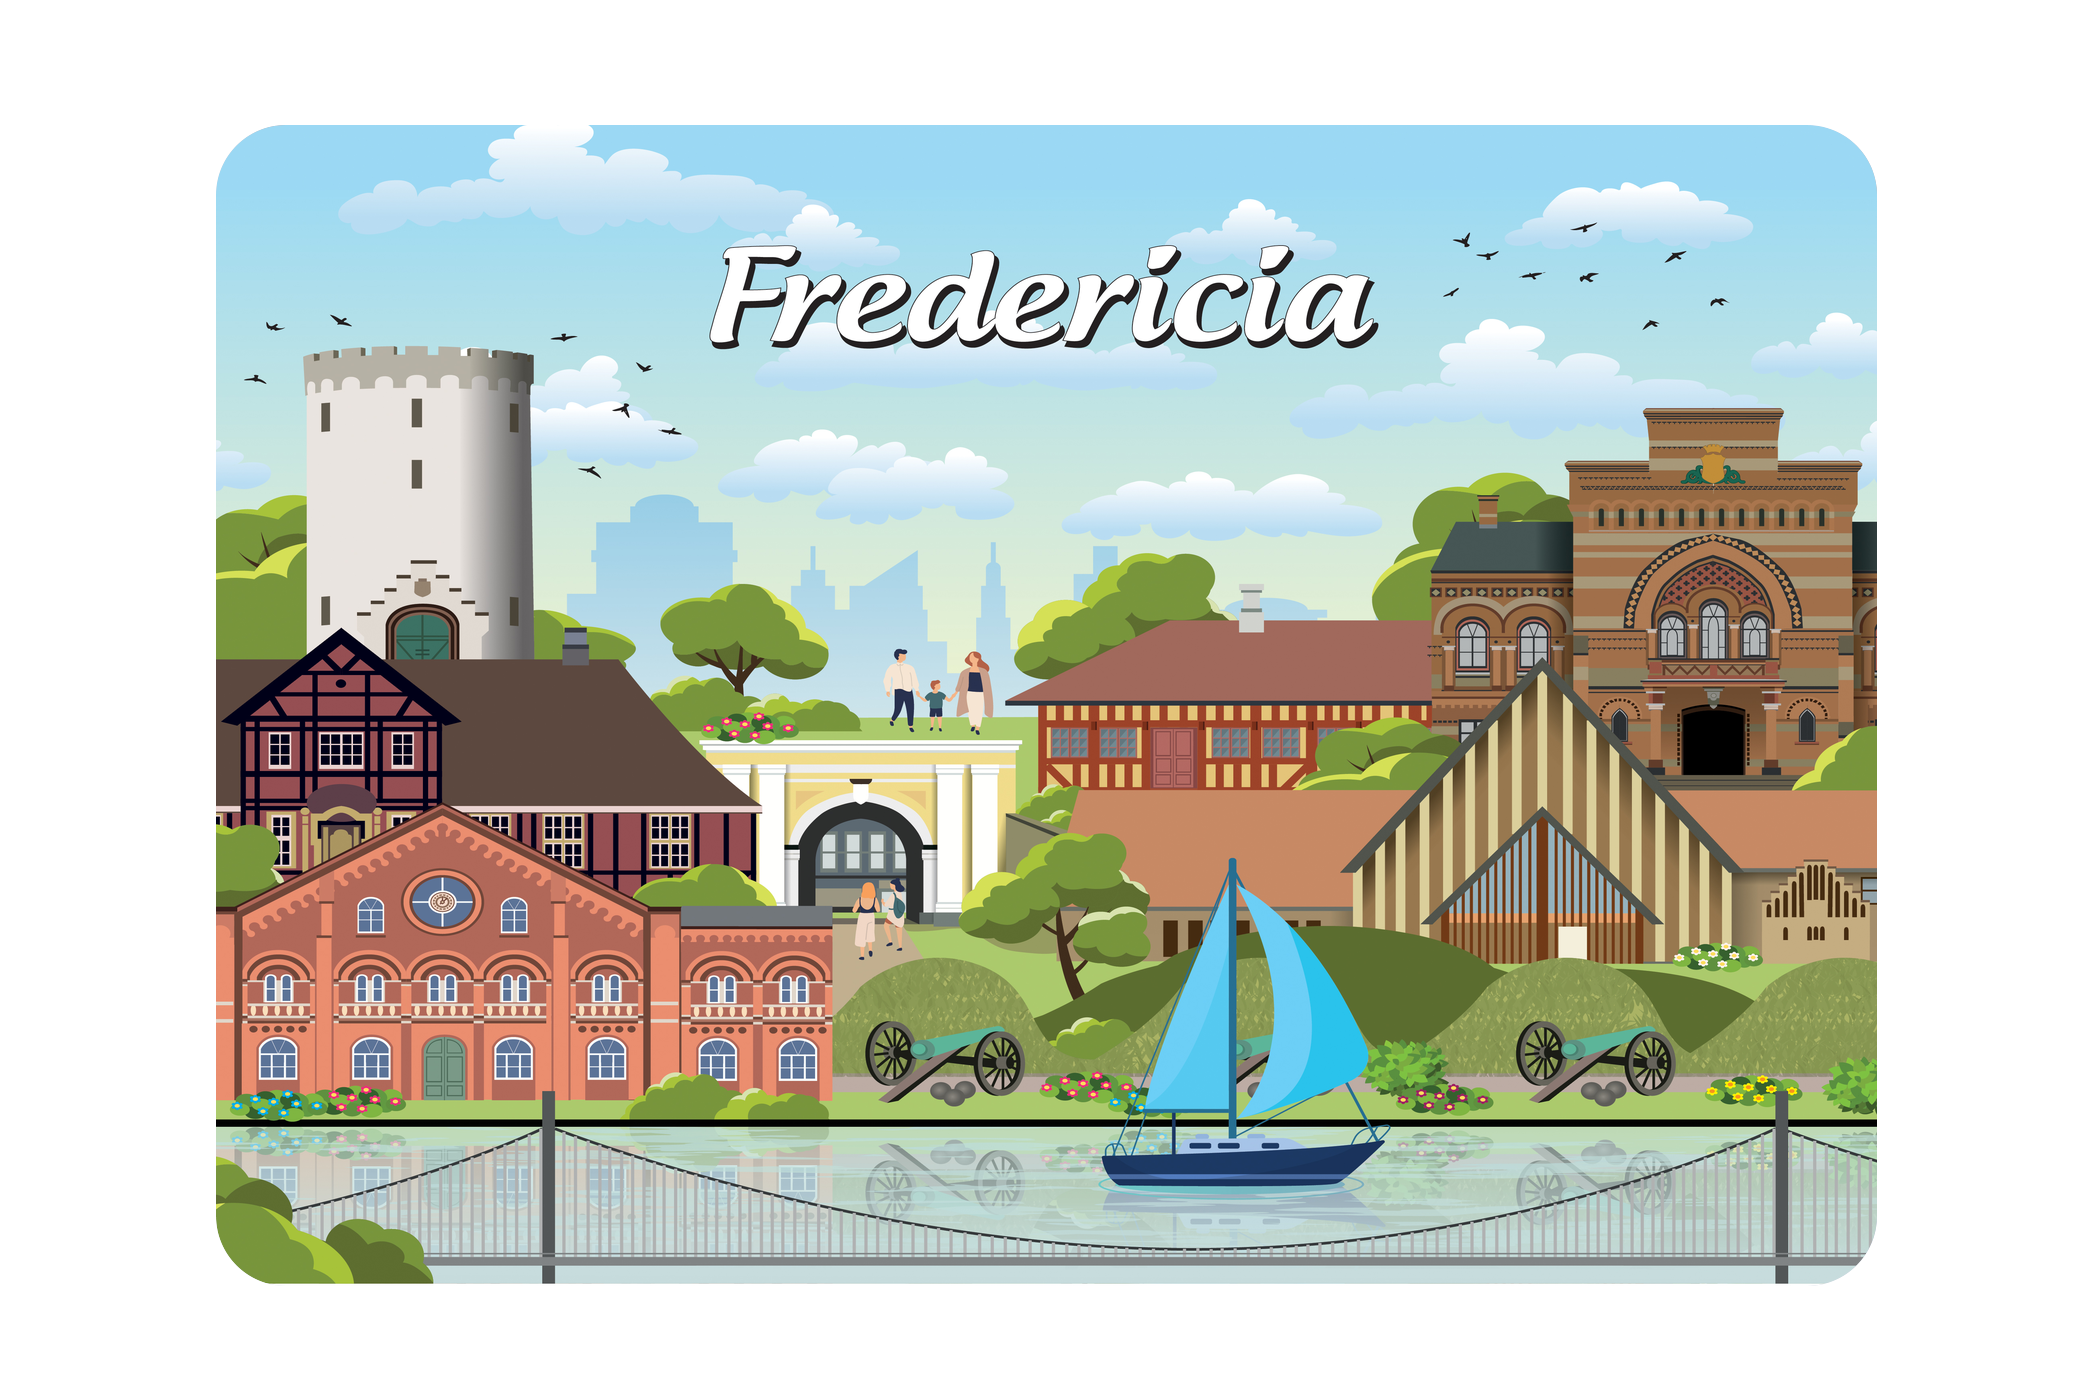 Fredericia - Bykoncept